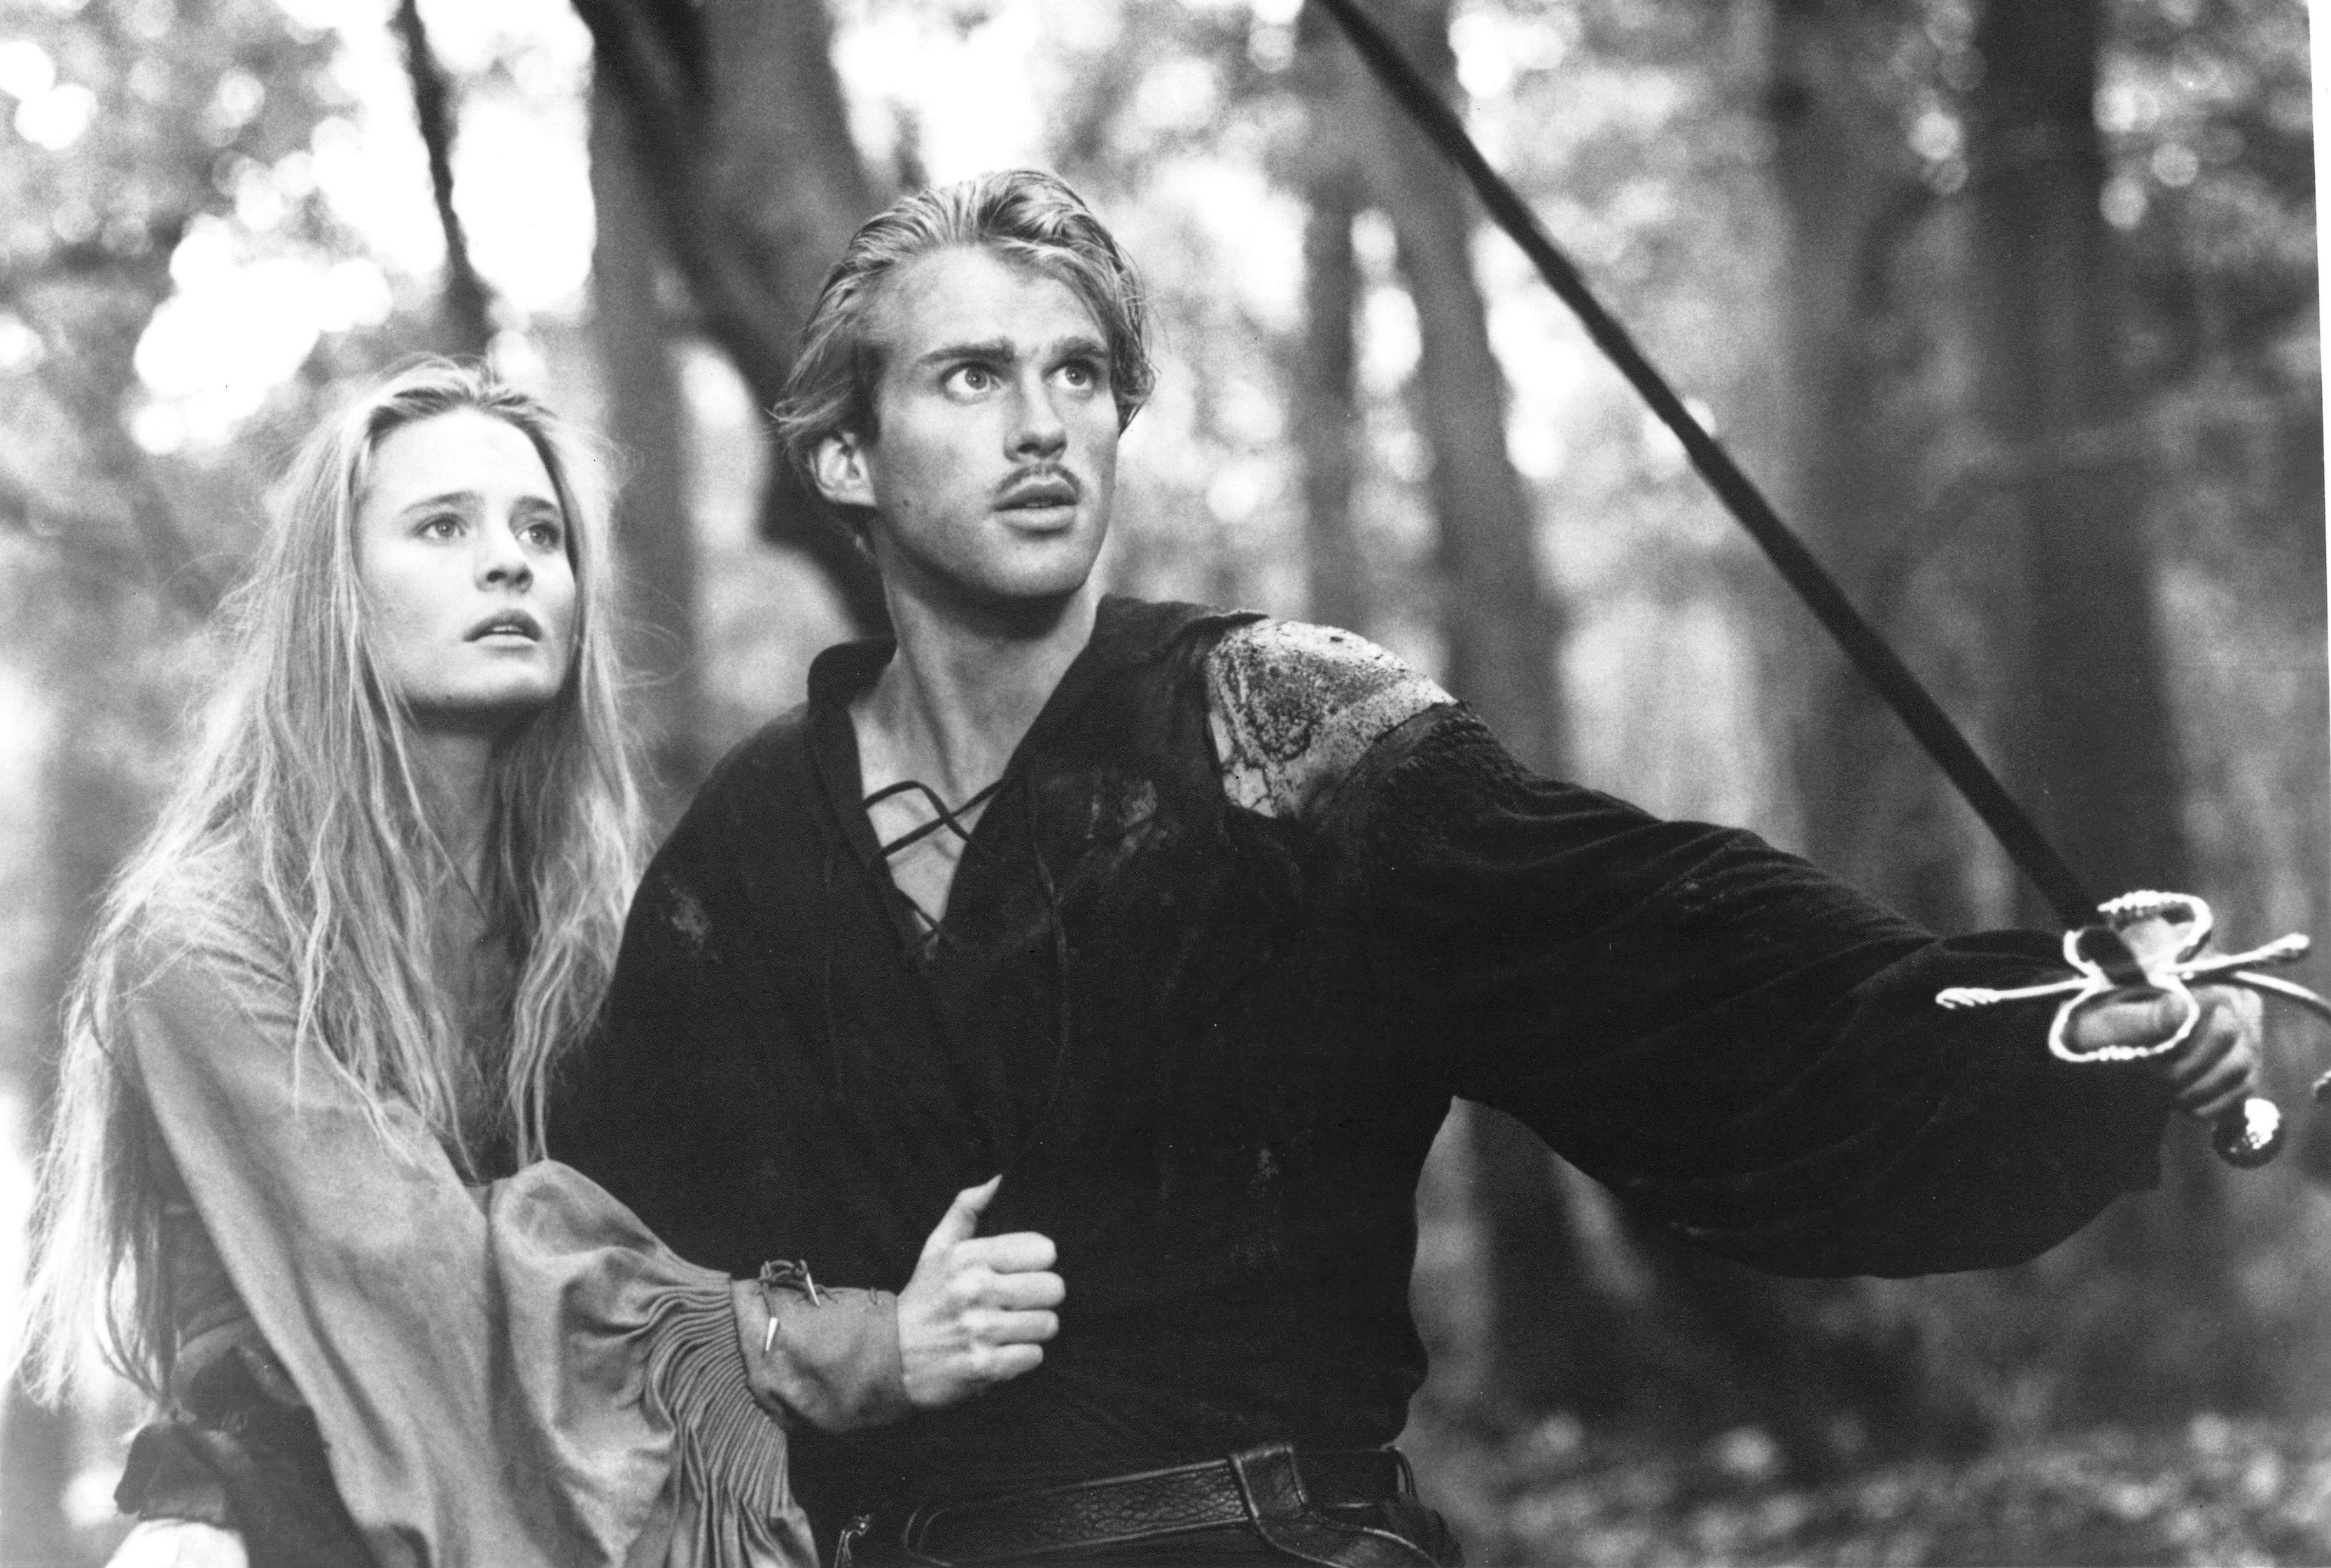 Westley (Cary Elwes) defends Princess Buttercup (Robin Wright) from Prince Humperdink’s henchman in "The Princess Bride."